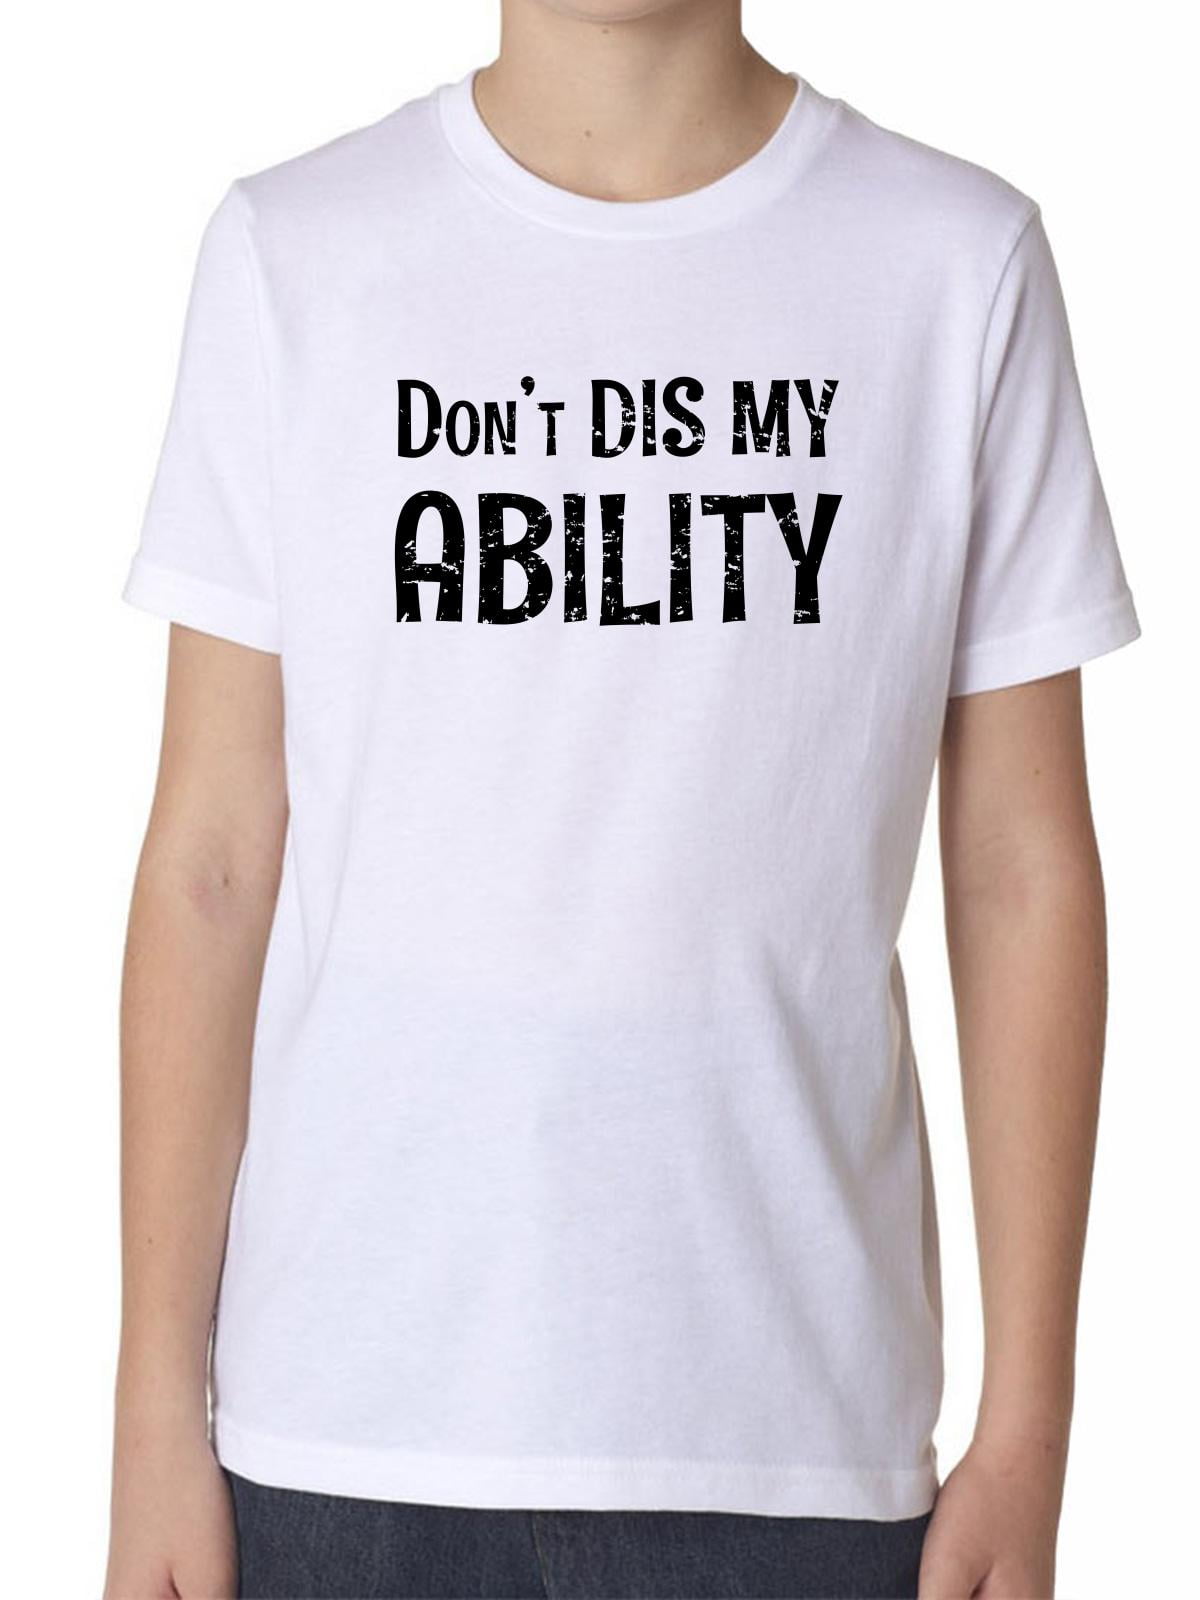 Don't Dis My Ability - Disabled Support Boy's Cotton Youth T-Shirt ...